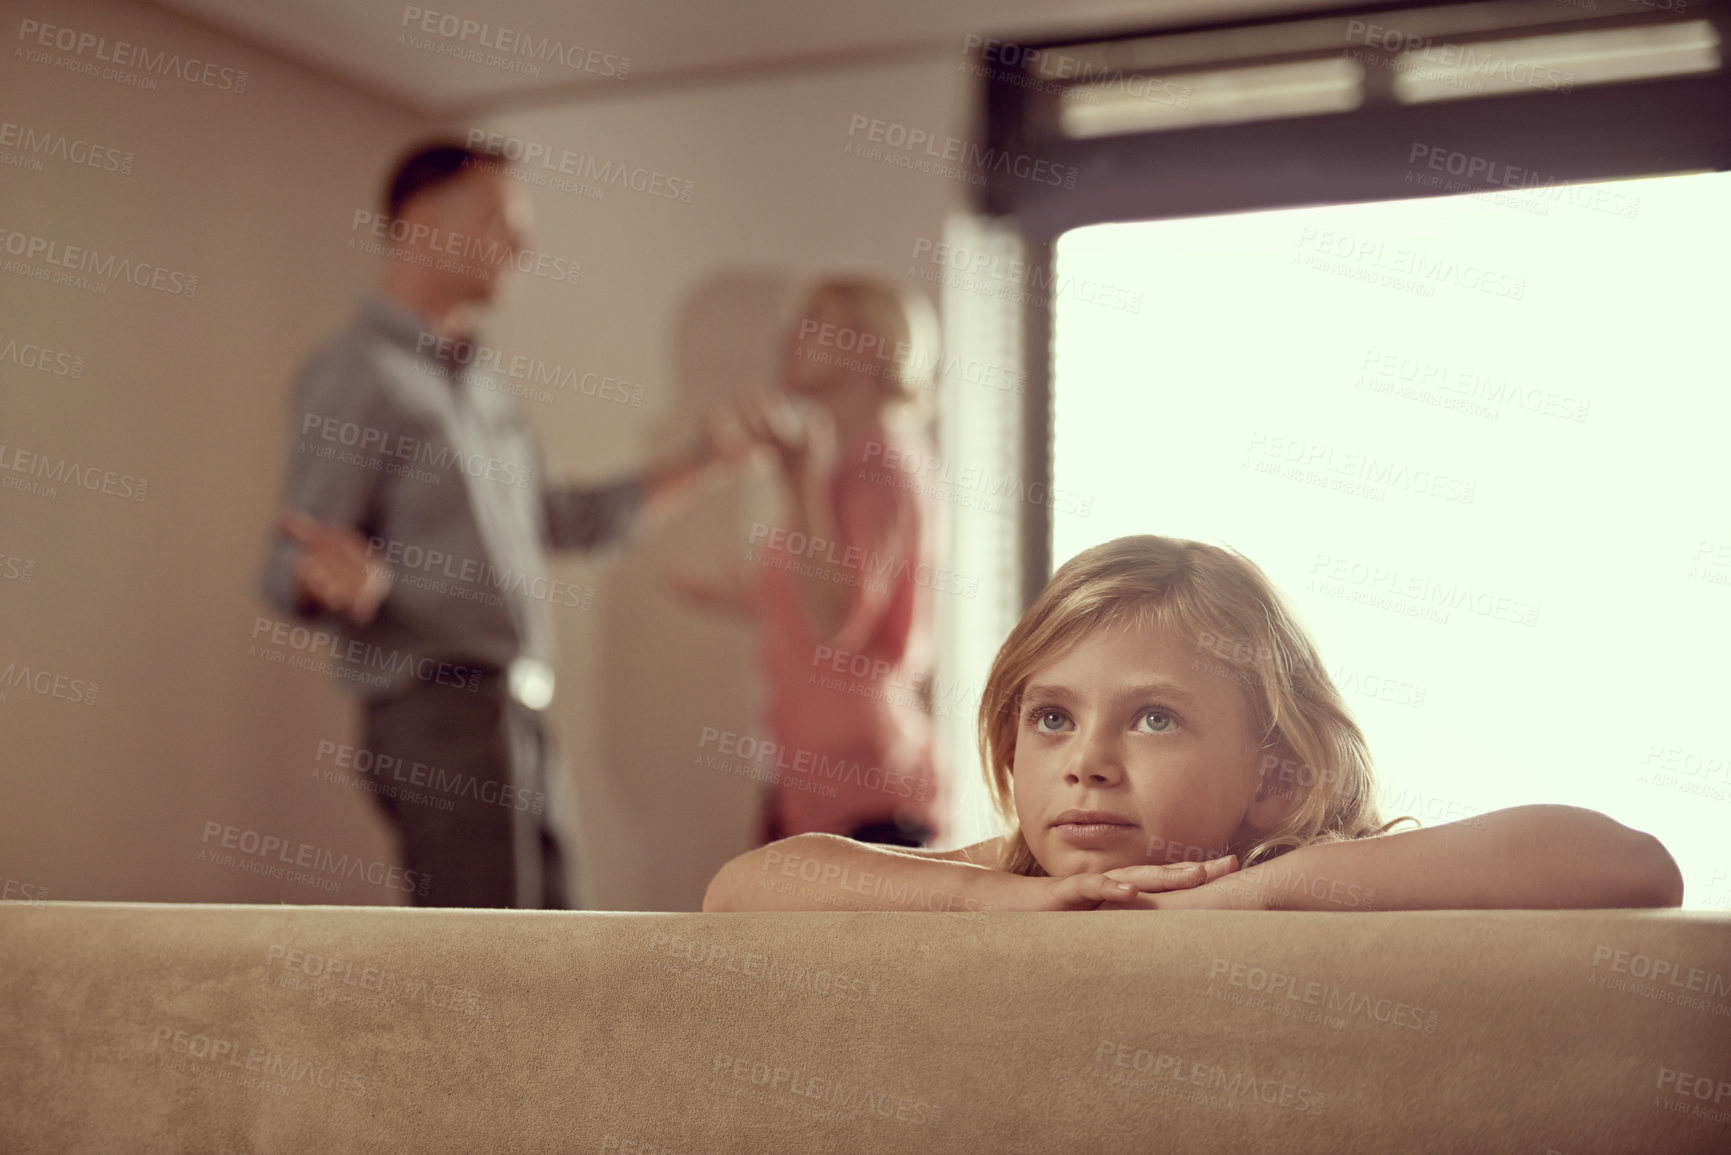 Buy stock photo Shot of a little girl looking unhappy as her parents argue in the background